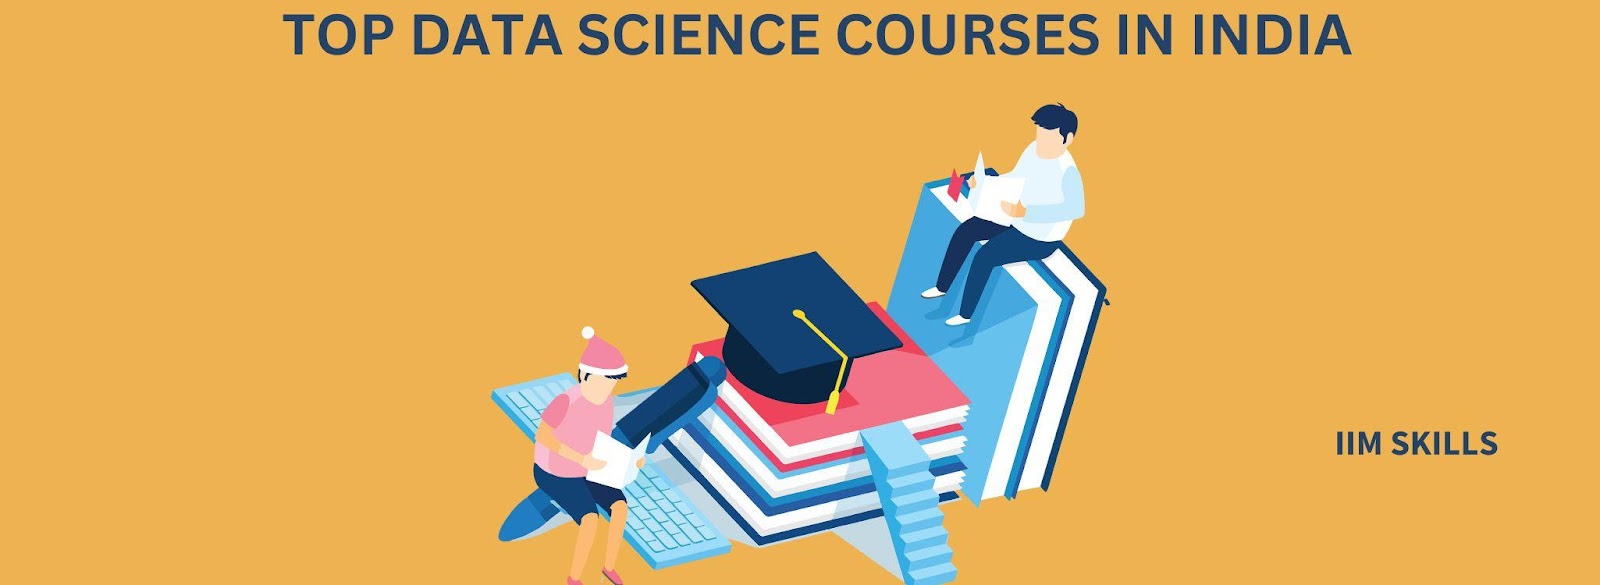 TOP DATA SCIENCE COURSES IN INDIA-compressed